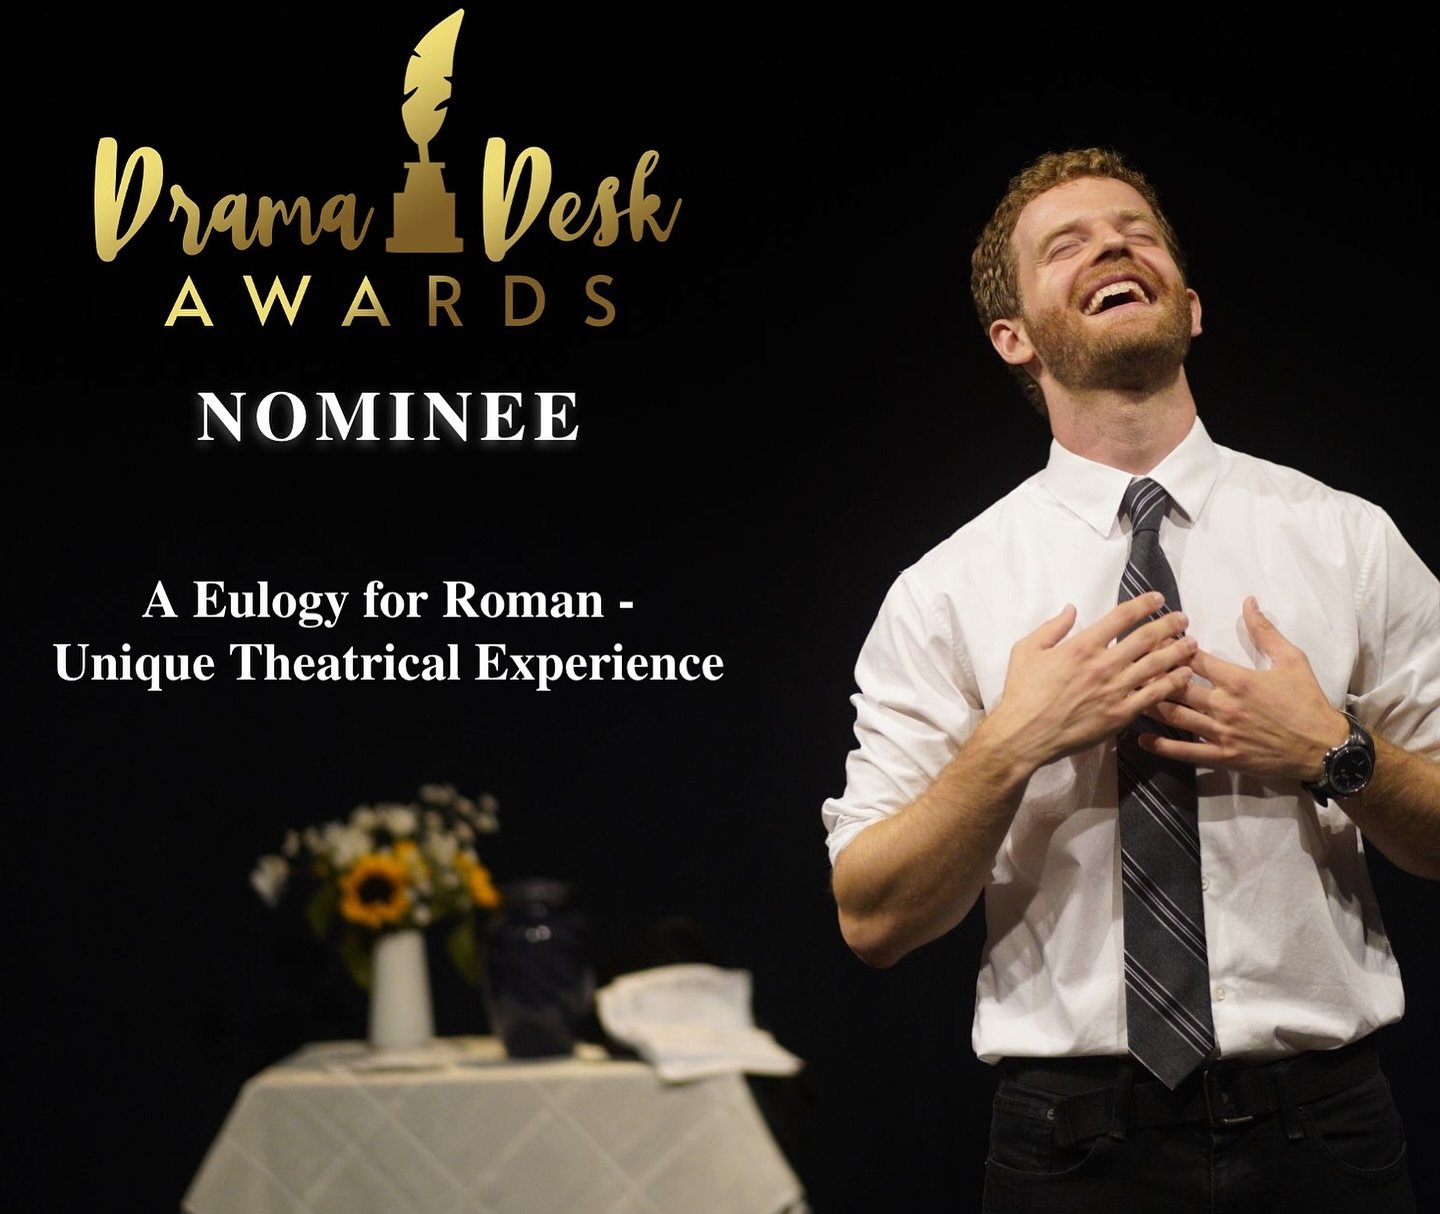 A shocking twist on the journey of A Eulogy For Roman! 

It is an incredible honor to be nominated by the Drama Desk Awards for our little memorial service with big heart. Thank you to everyone who championed this project, large or small, in the last